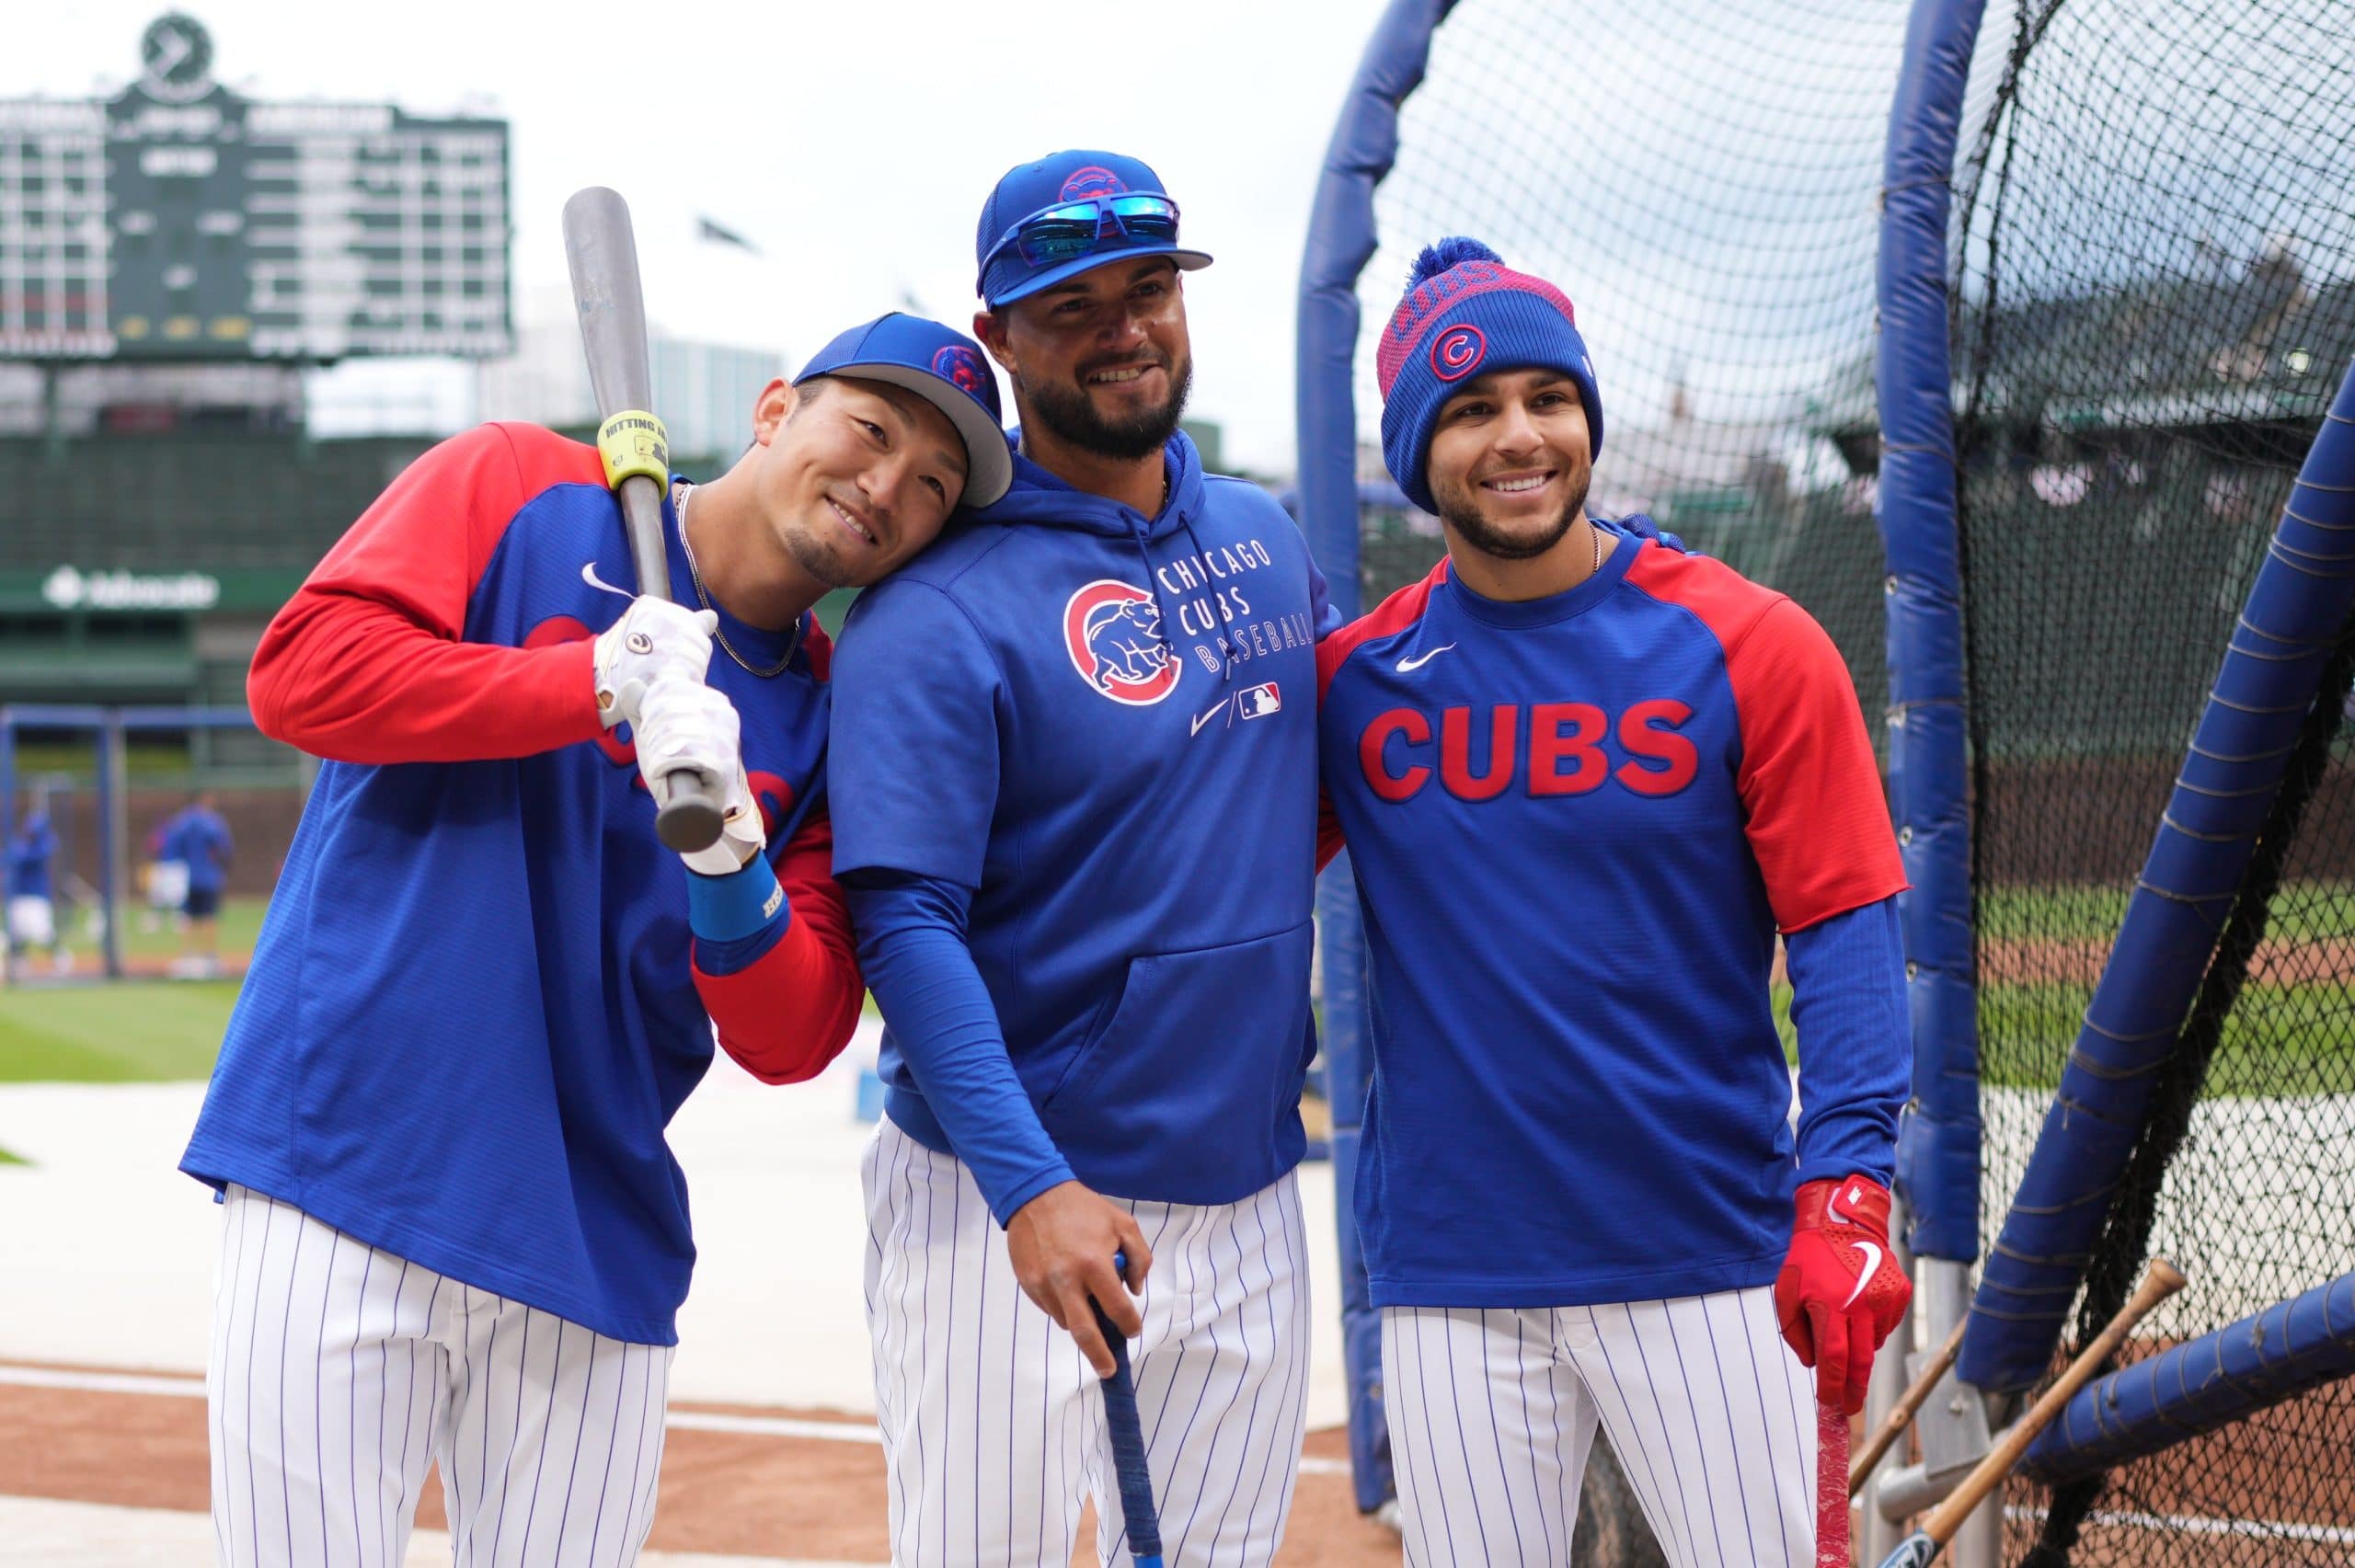 Expectations for the 2022 Cubs AreComplicated